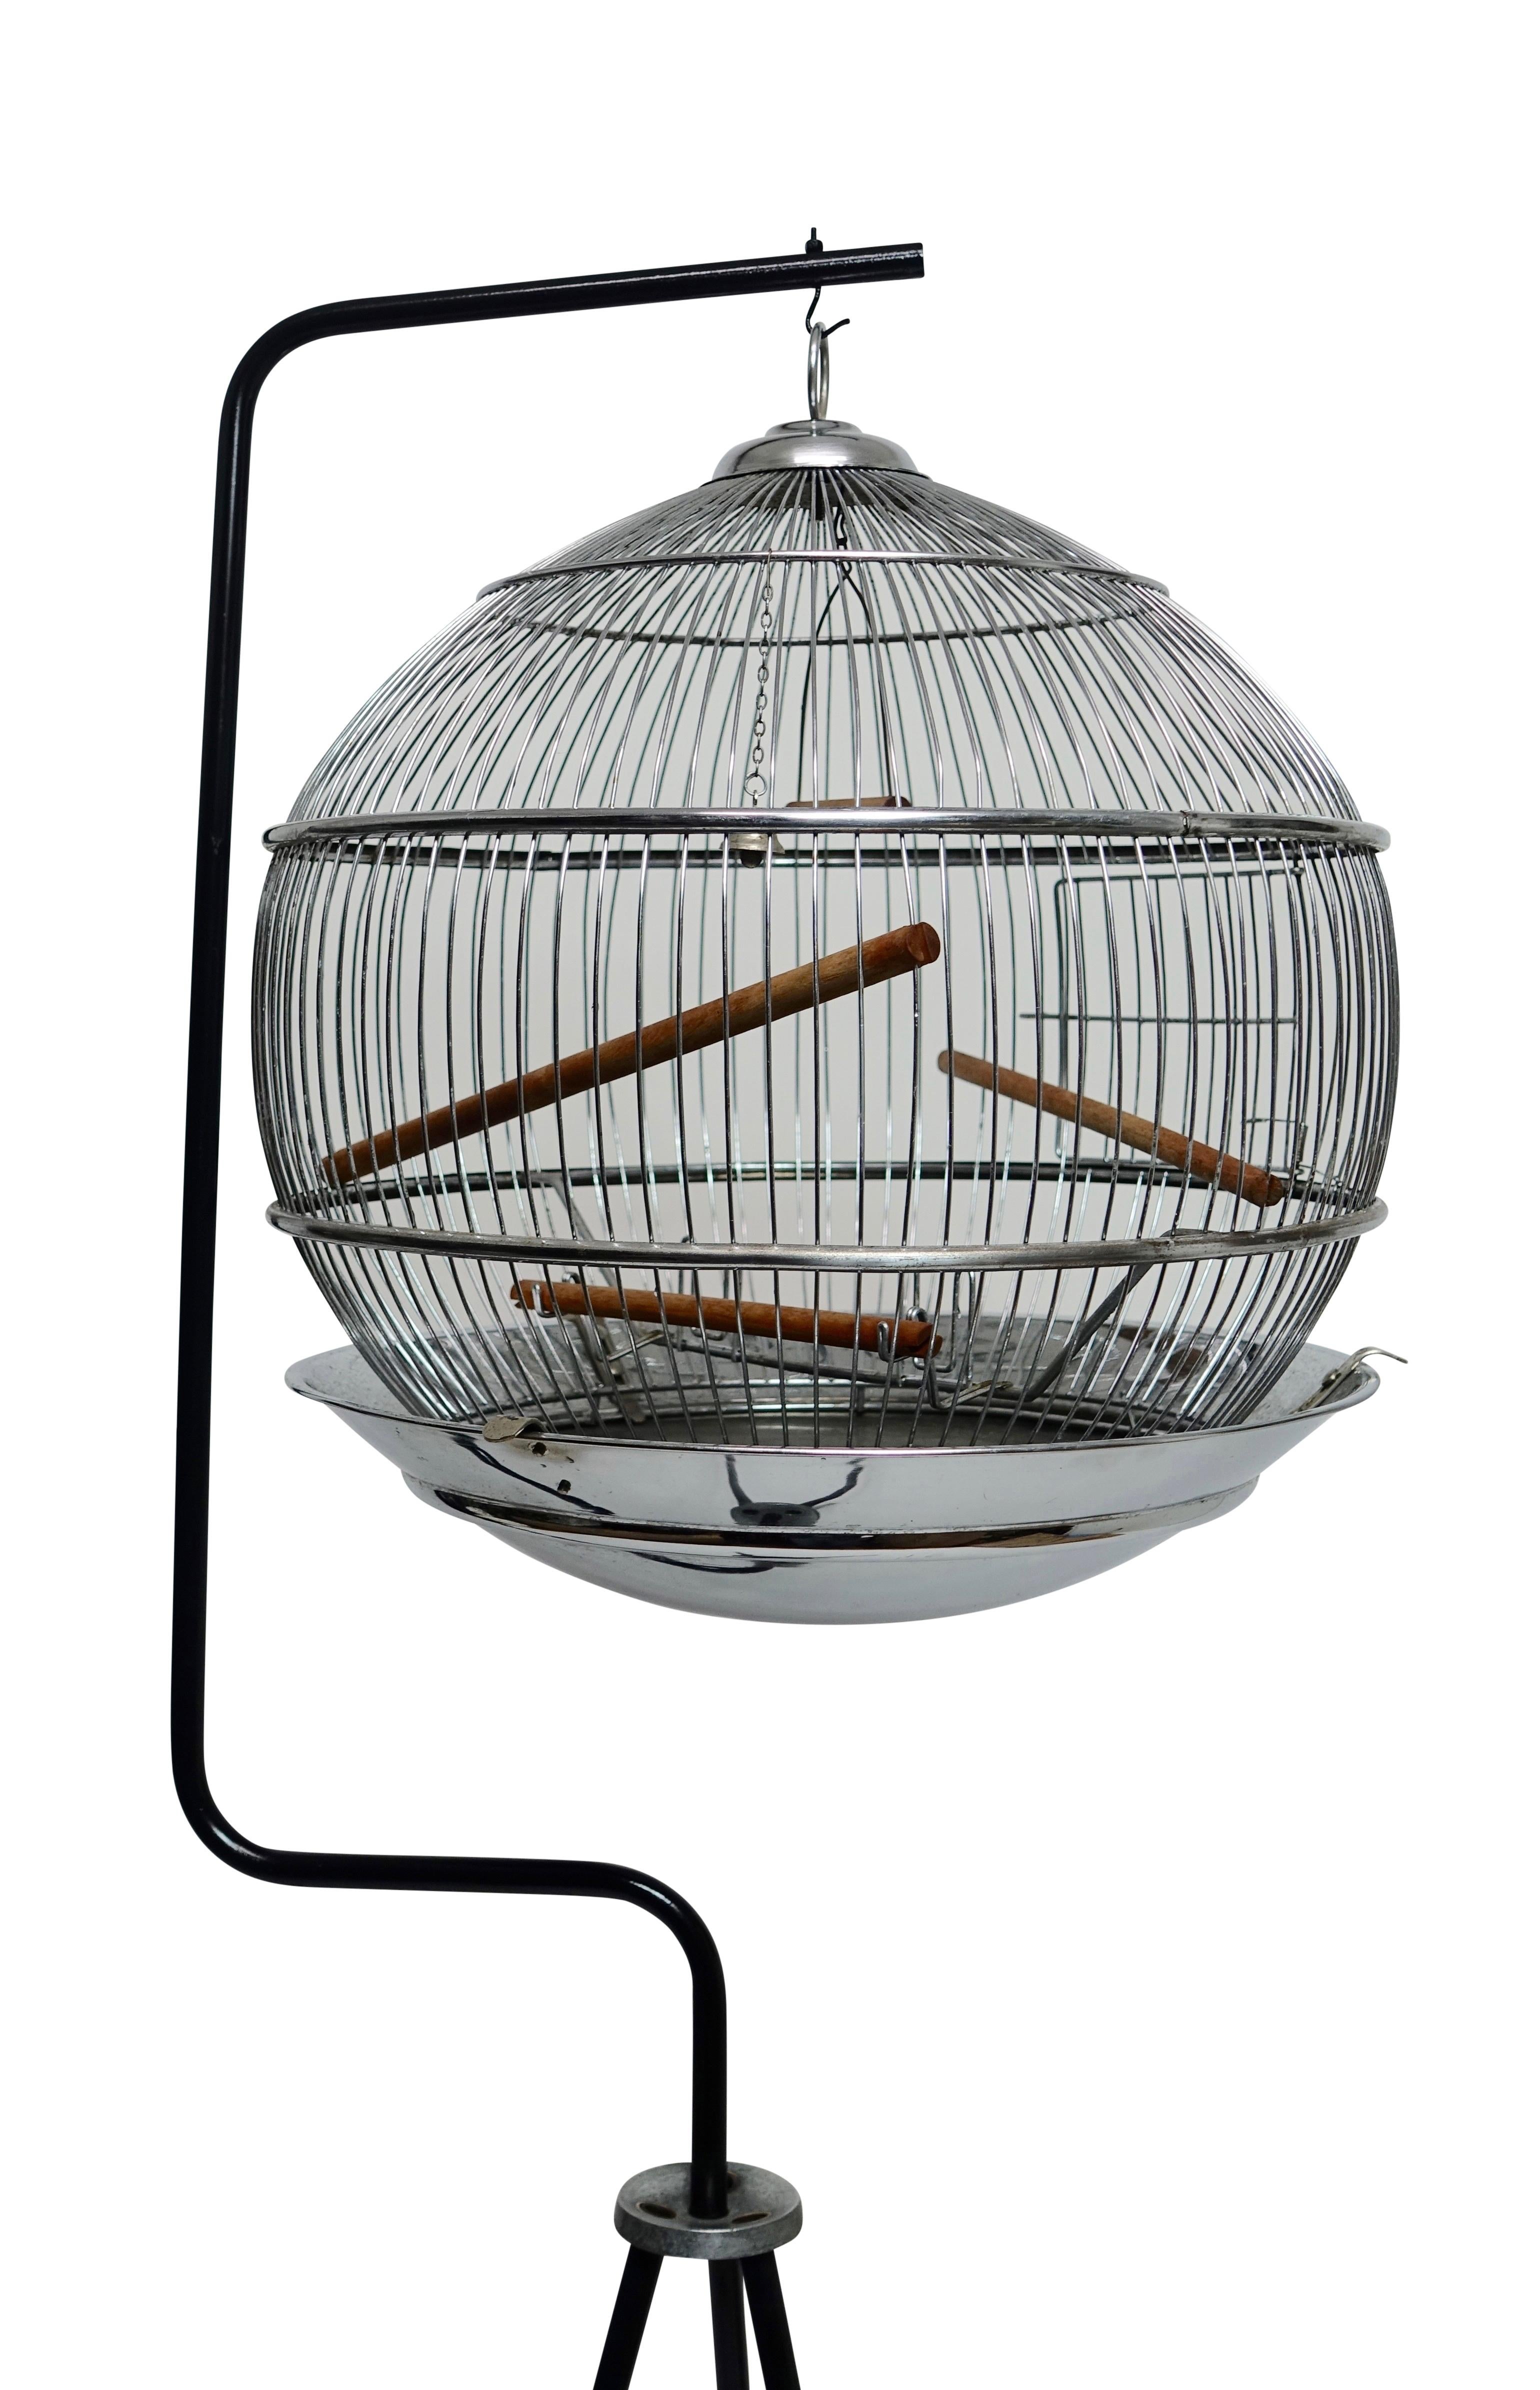 Sweet ball shape chrome birdcage suspended on an iron tripod base, American, circa 1950.
Measures: Bird cage height - 20 inches x diameter-15.5 inches.